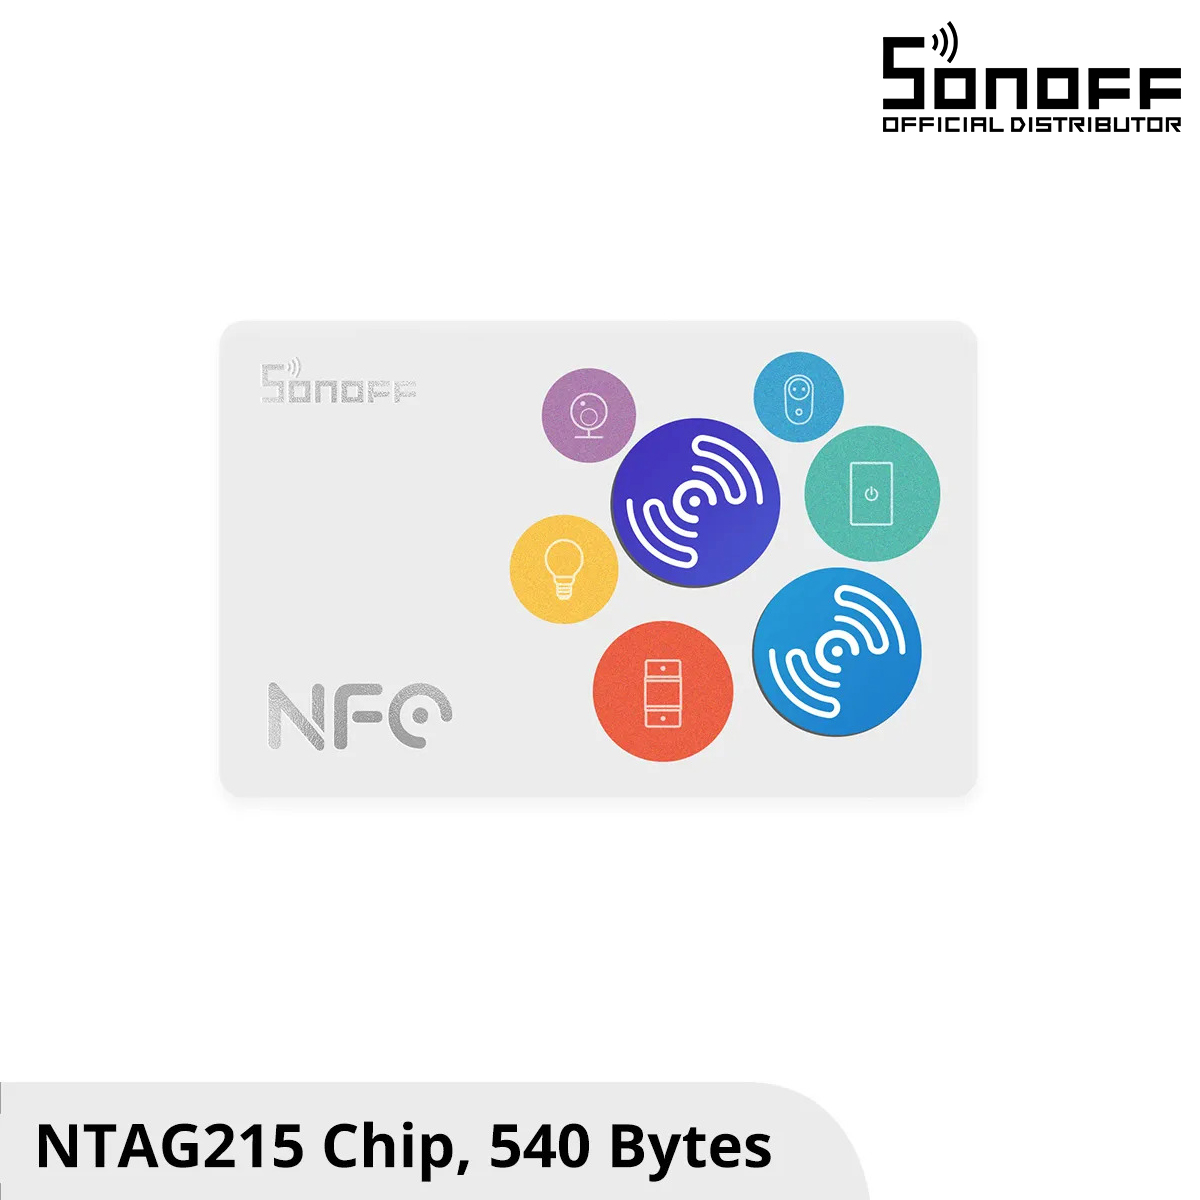 GloboStar® 80100 SONOFF 2 x PAIR NFC Tag Tap to Trigger Tap to Start Your Smart Life Carry-on or Sticker One Scene/NFC